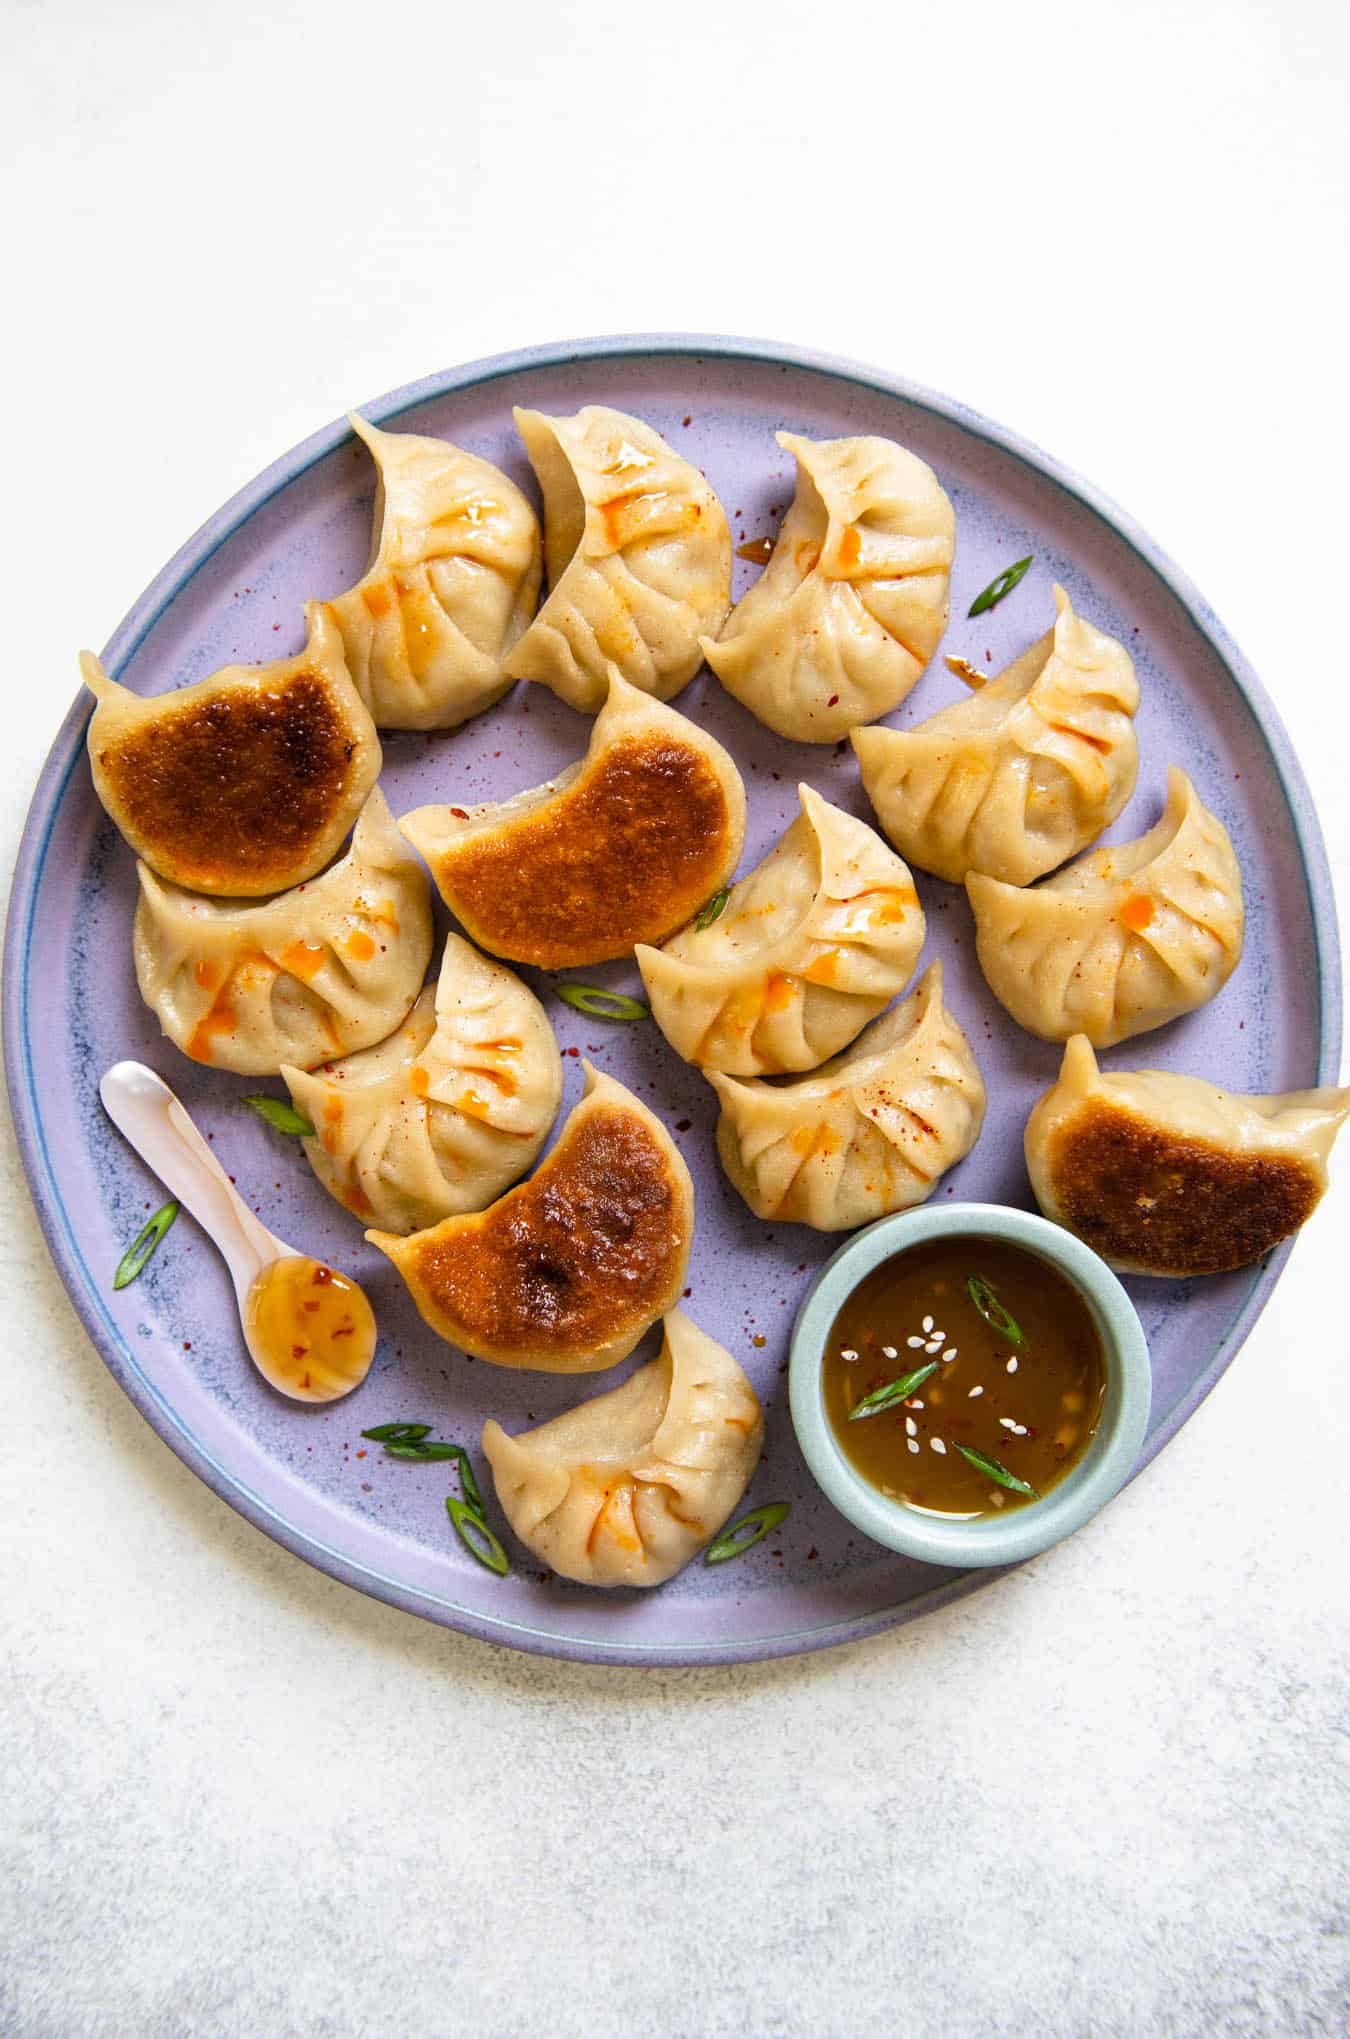 Pork Cabbage Potstickers - includes step-by-step photos